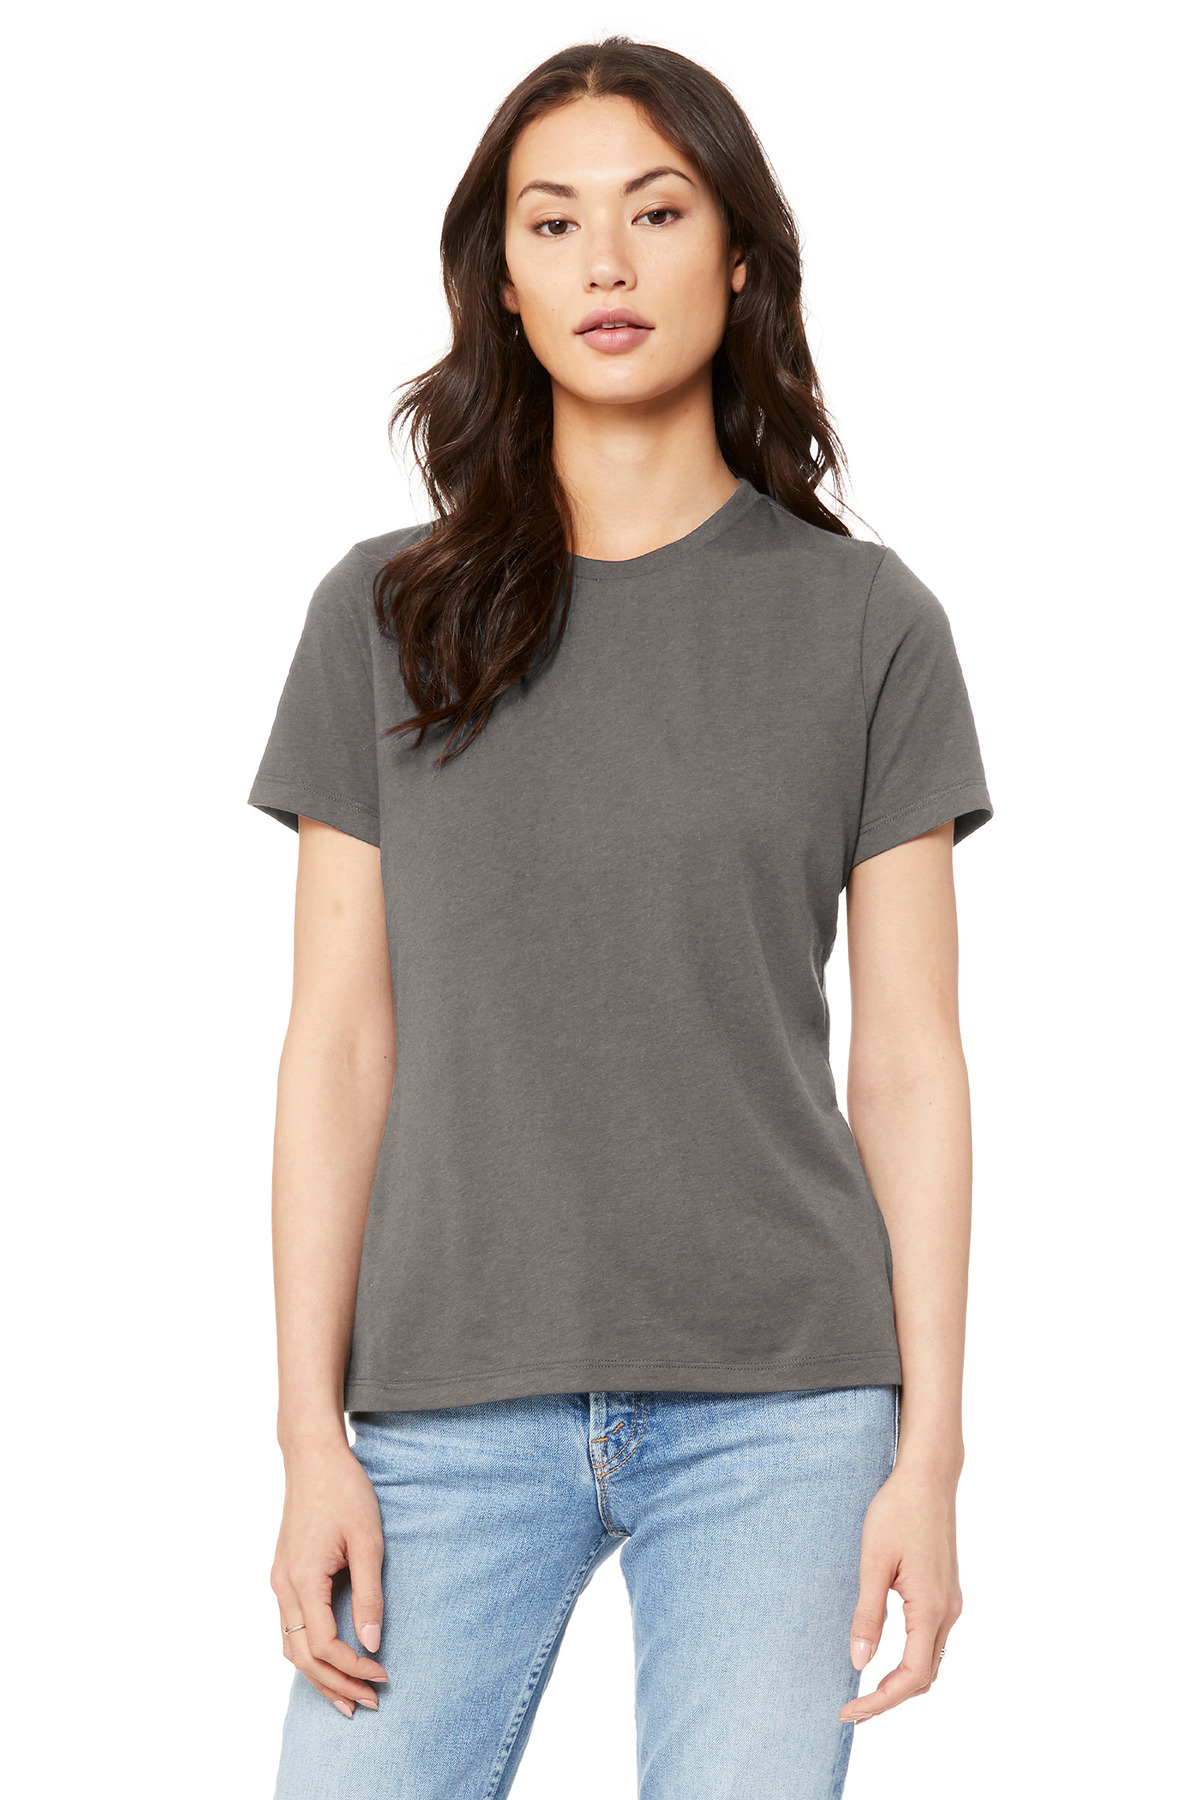 BELLA+CANVAS  Womens Relaxed Jersey Short Sleeve Tee. BC6400